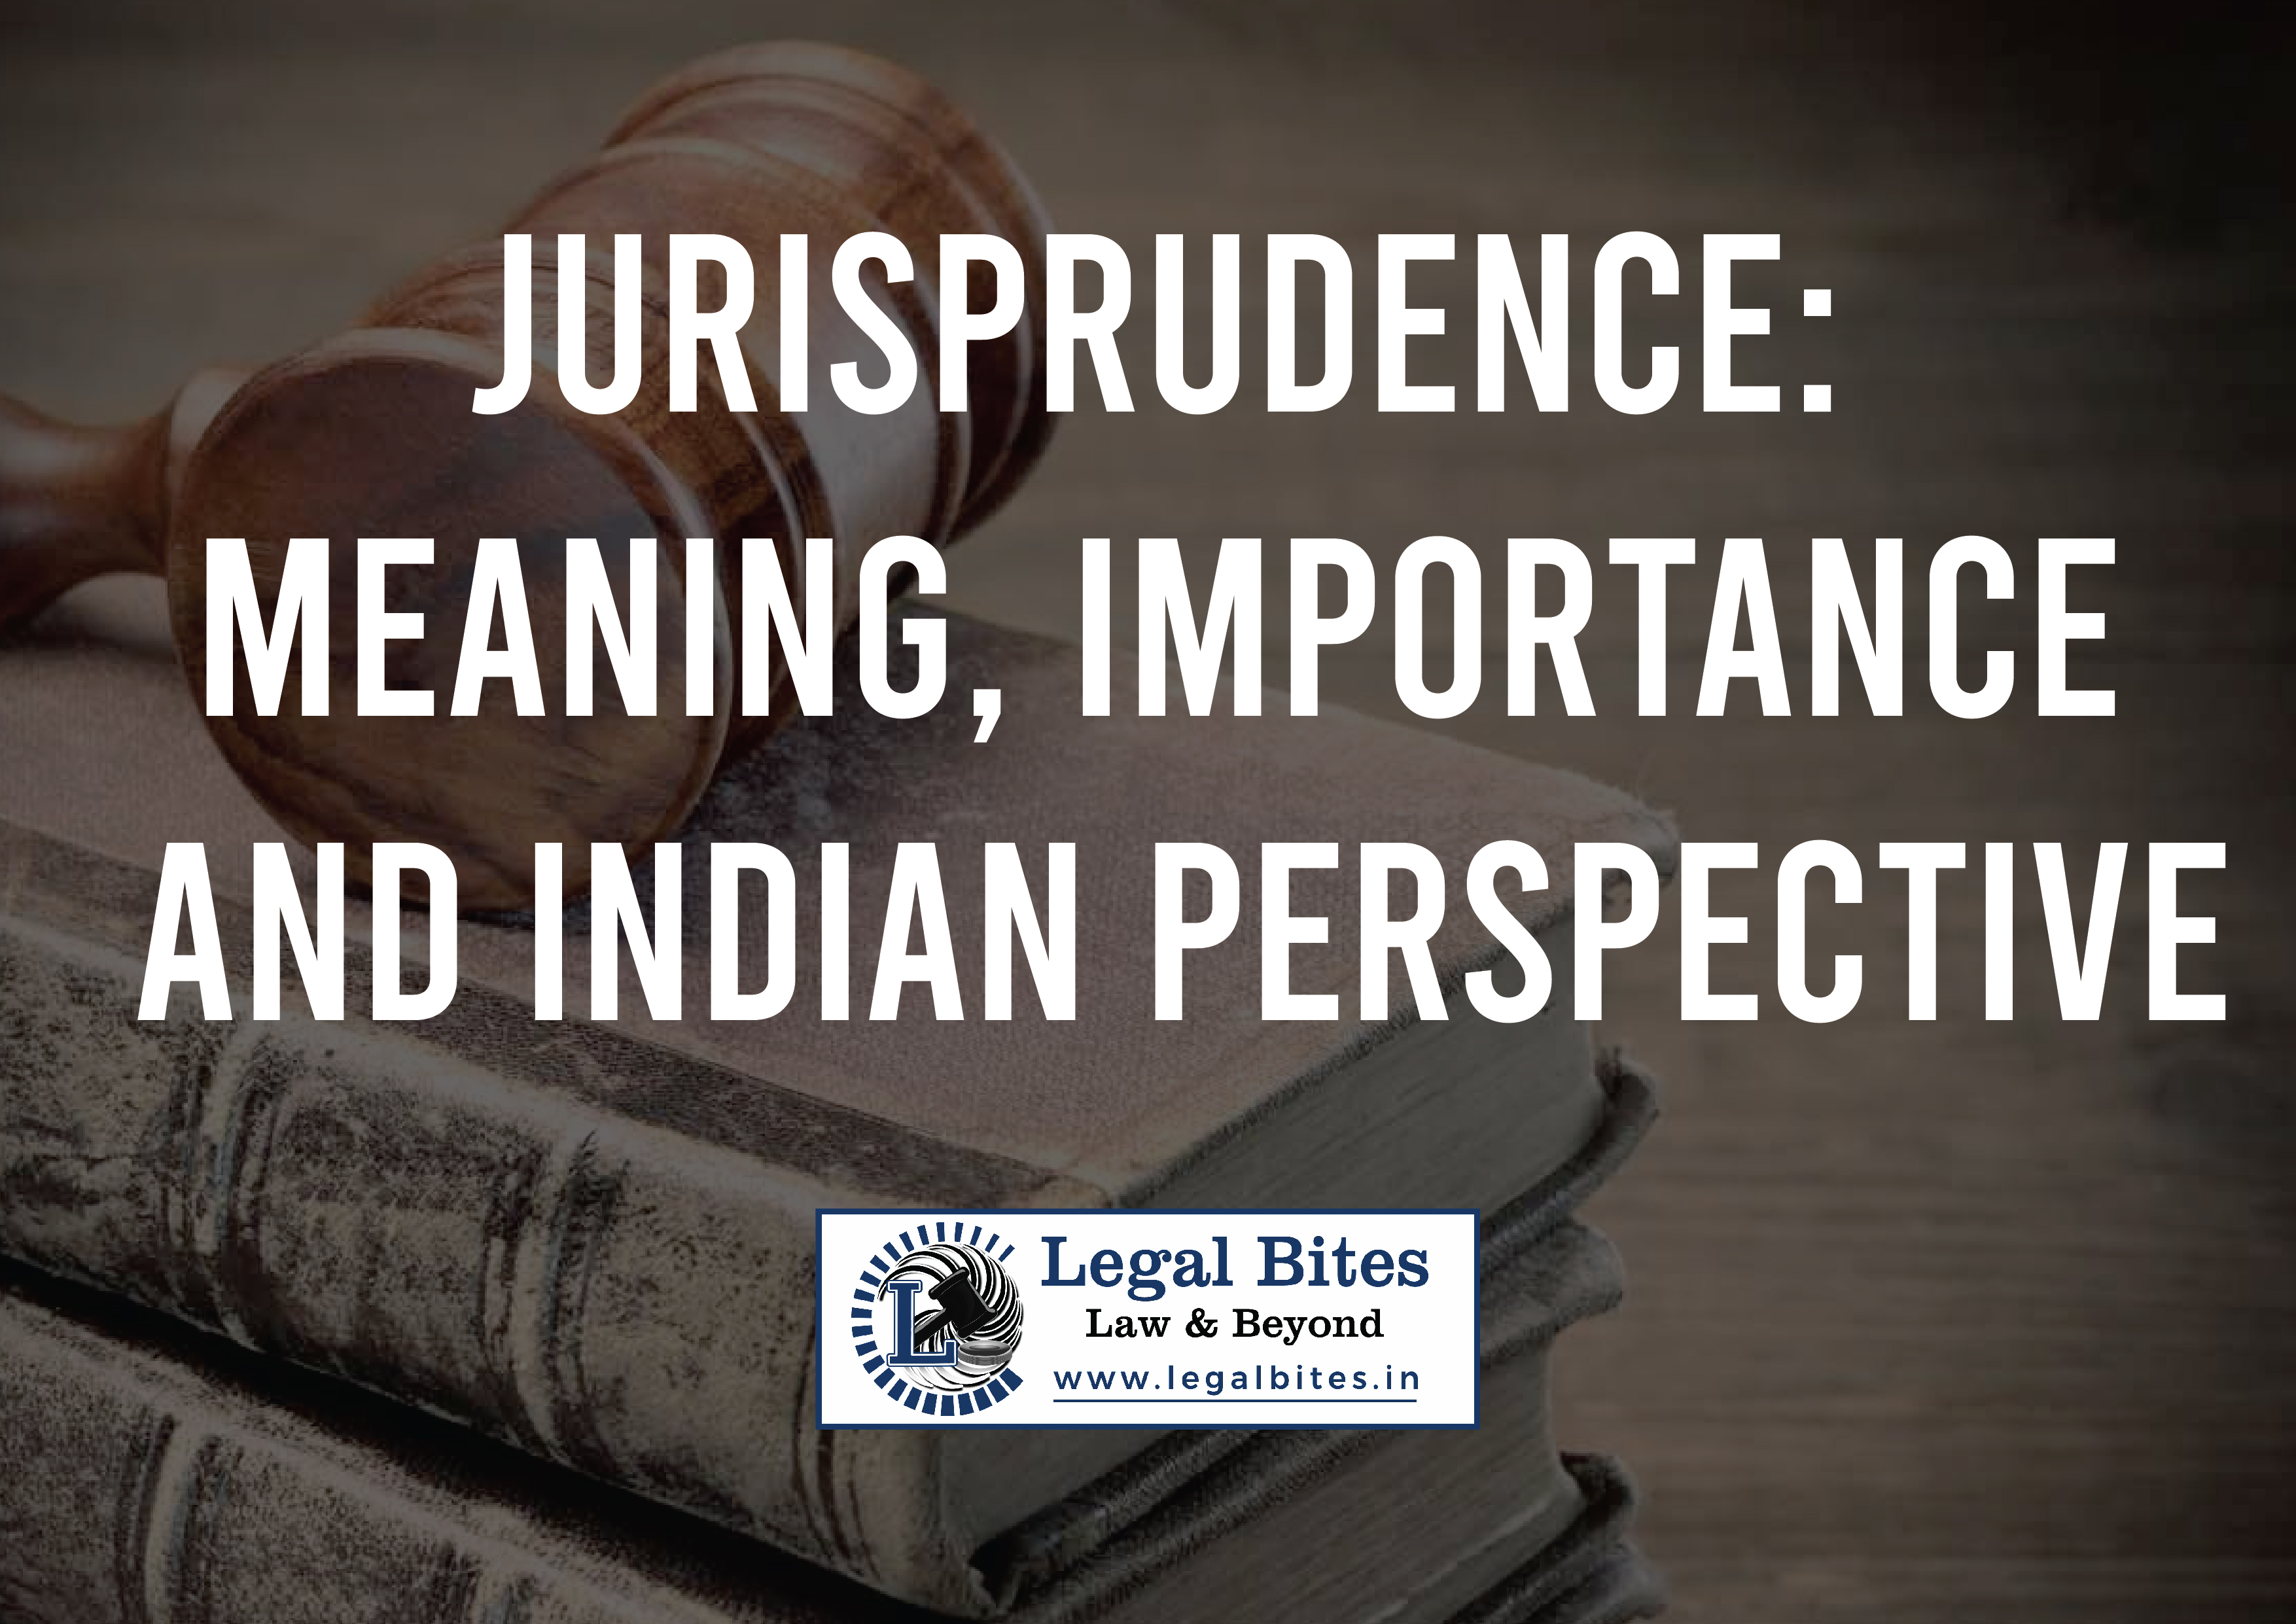 Jurisprudence Meaning, Importance and Indian Perspective